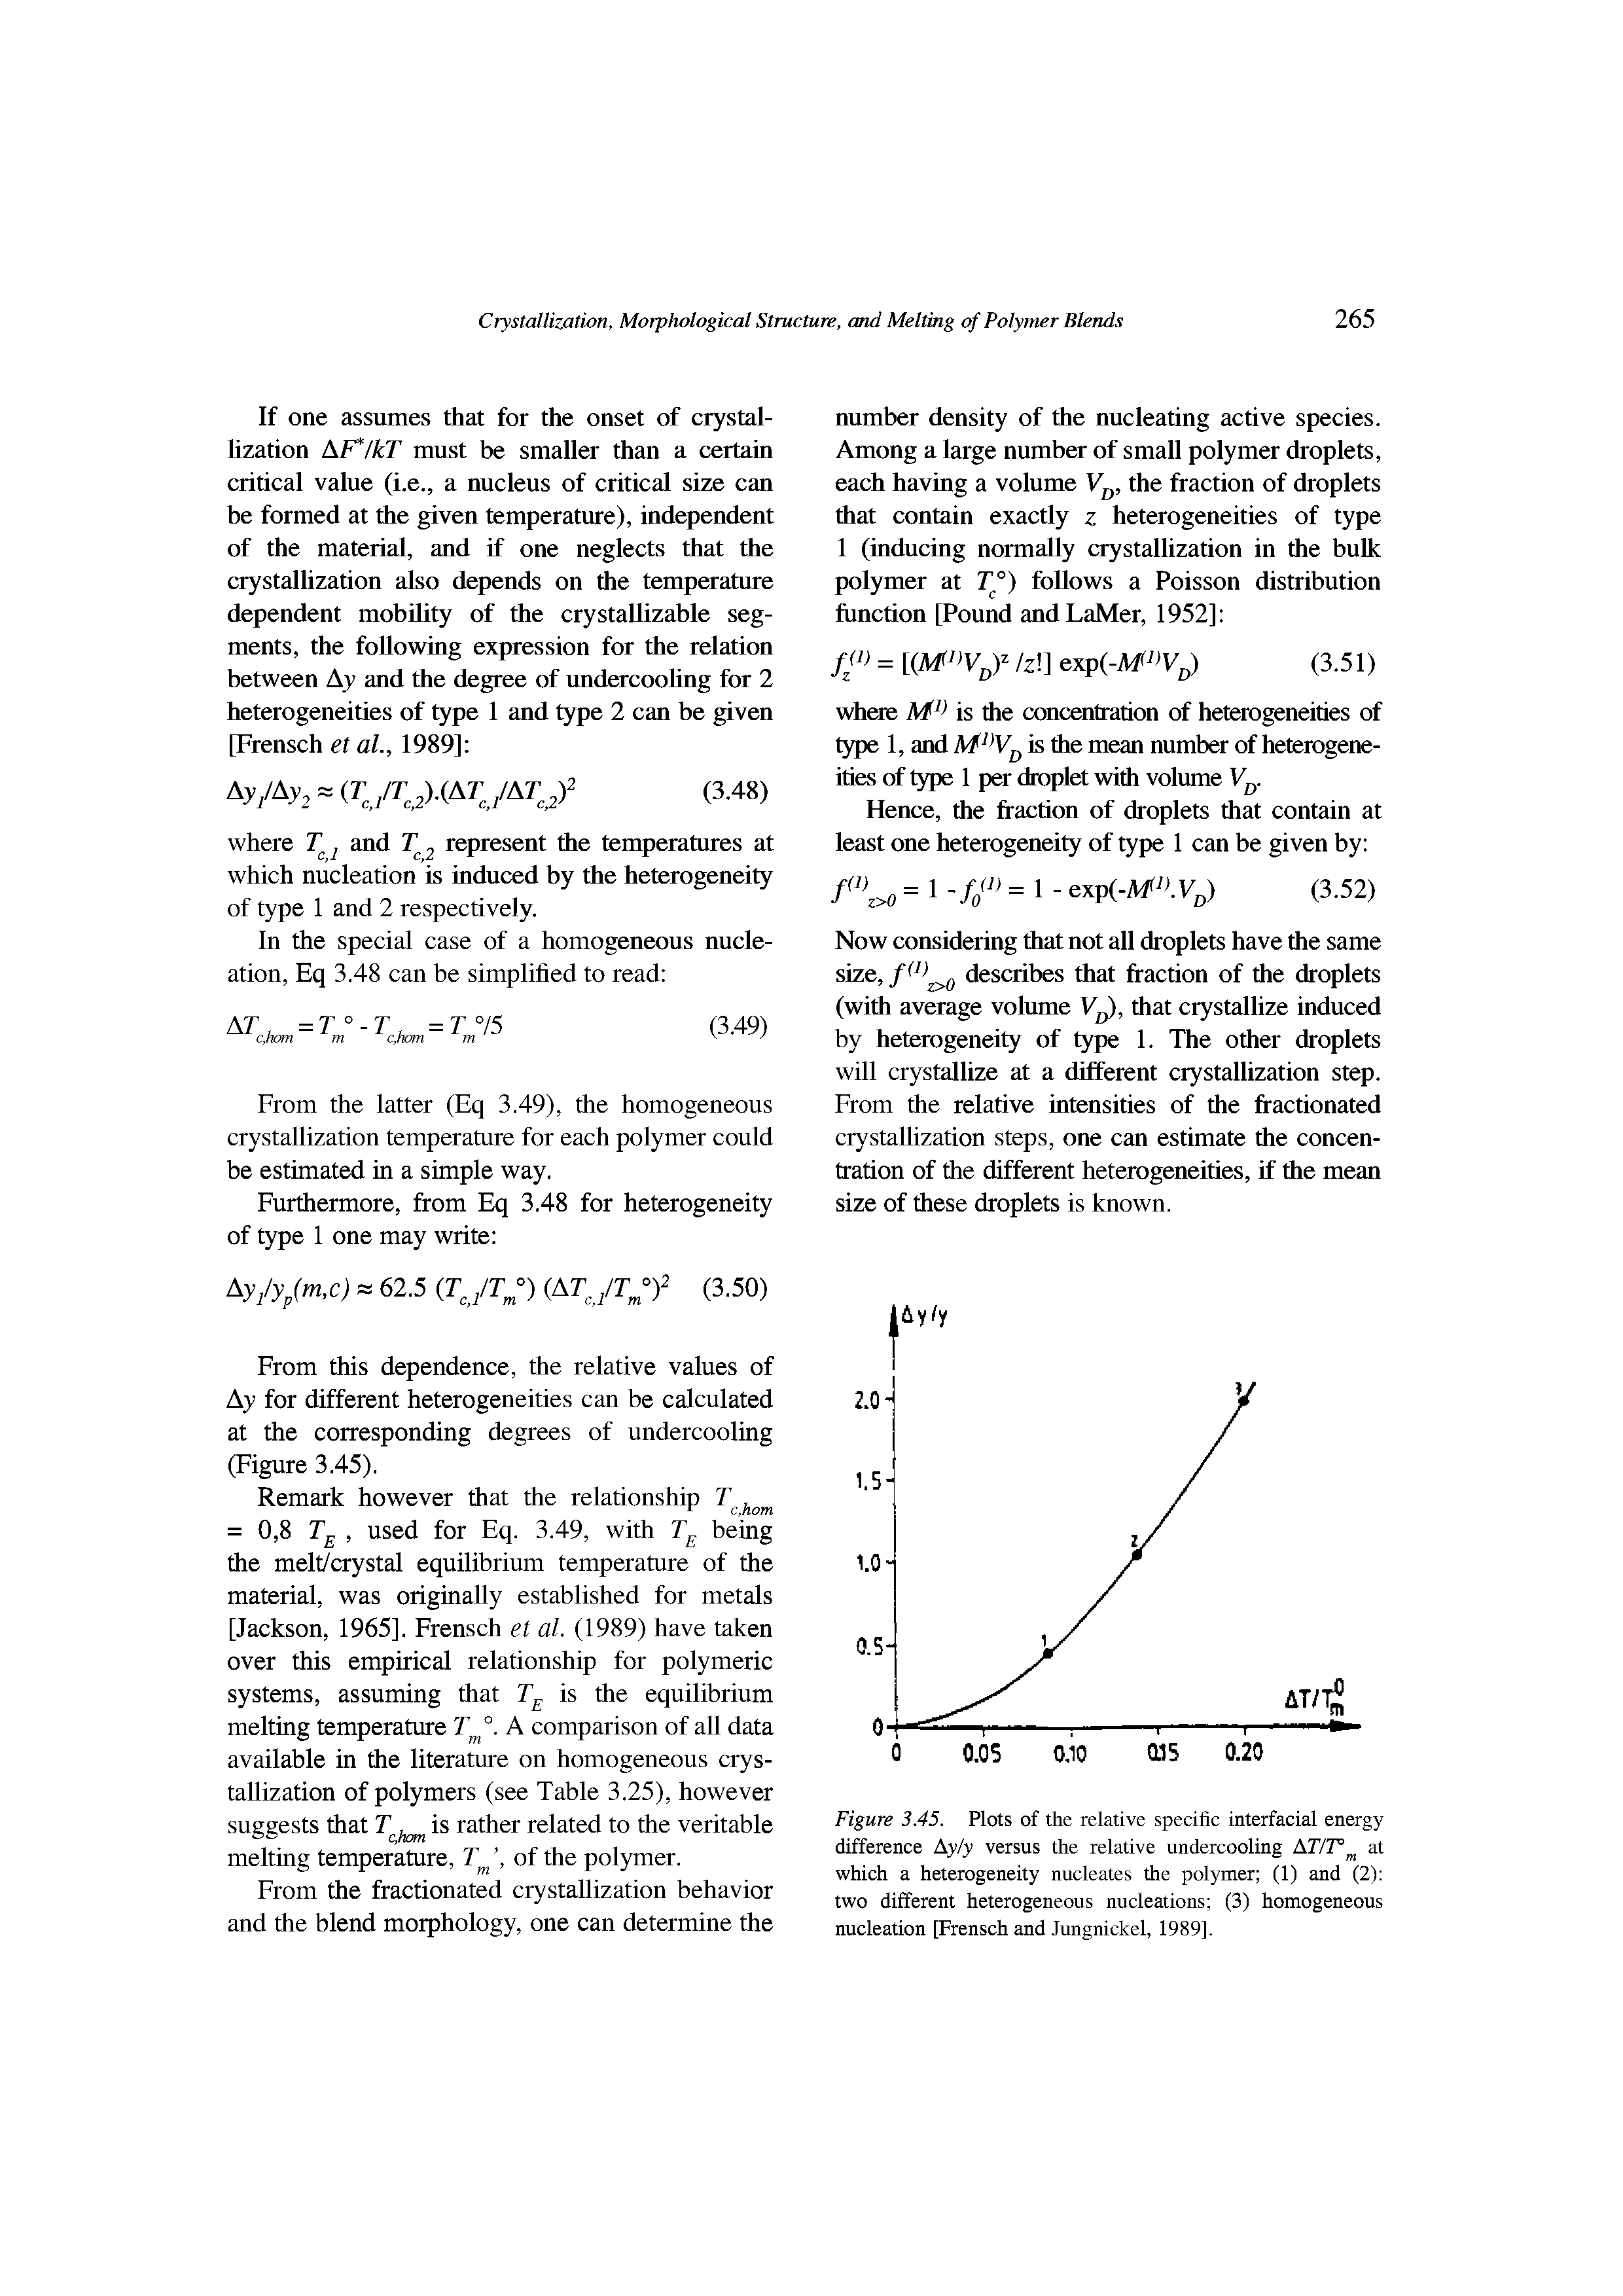 Figure 3.45. Plots of the relative specific interfacial energy difference Ay/y versus the relative undercooling AT/T at which a heterogeneity nucleates the polymer (1) and (2) two different heterogeneous nucleations (3) homogeneous nucleation [Frensch and Jungnickel, 1989].